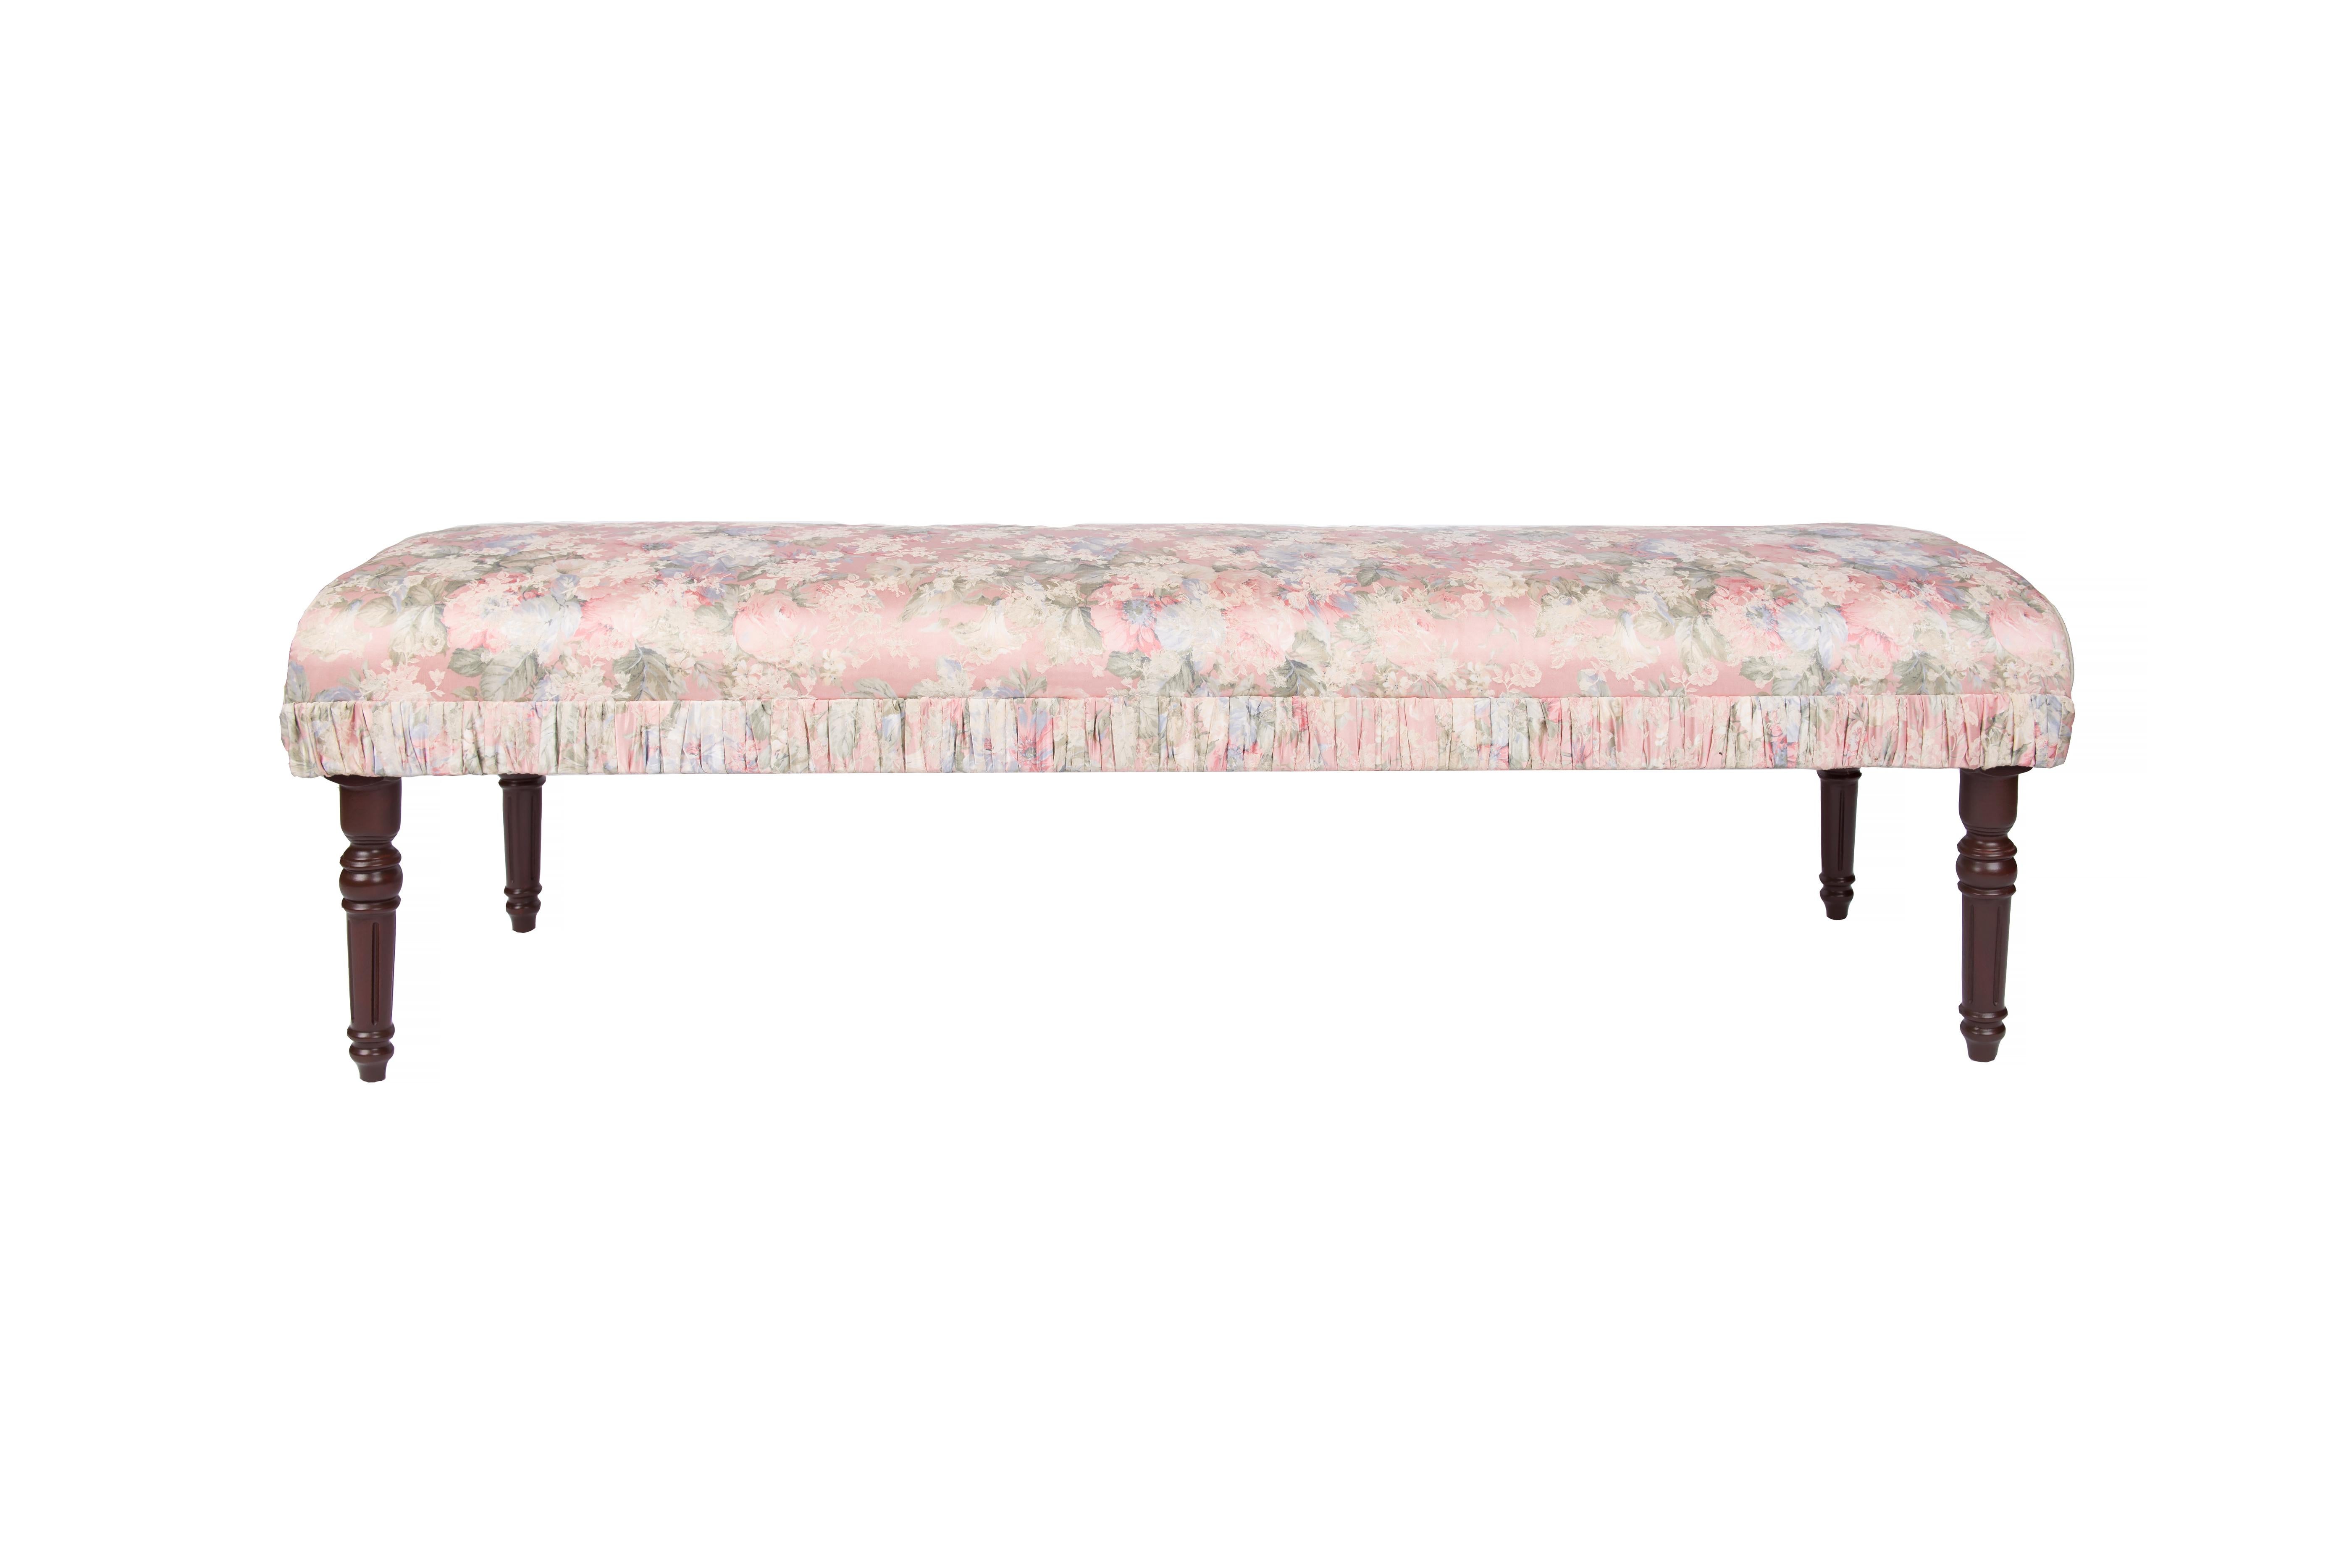 19th century Regency style bench in solid wood, the upholstery is a rose flowers motif silky fabric. Authentic condition, no damages or miss or discoloration on fabric. Origin England. It can be reupholstered if client would like so, please request